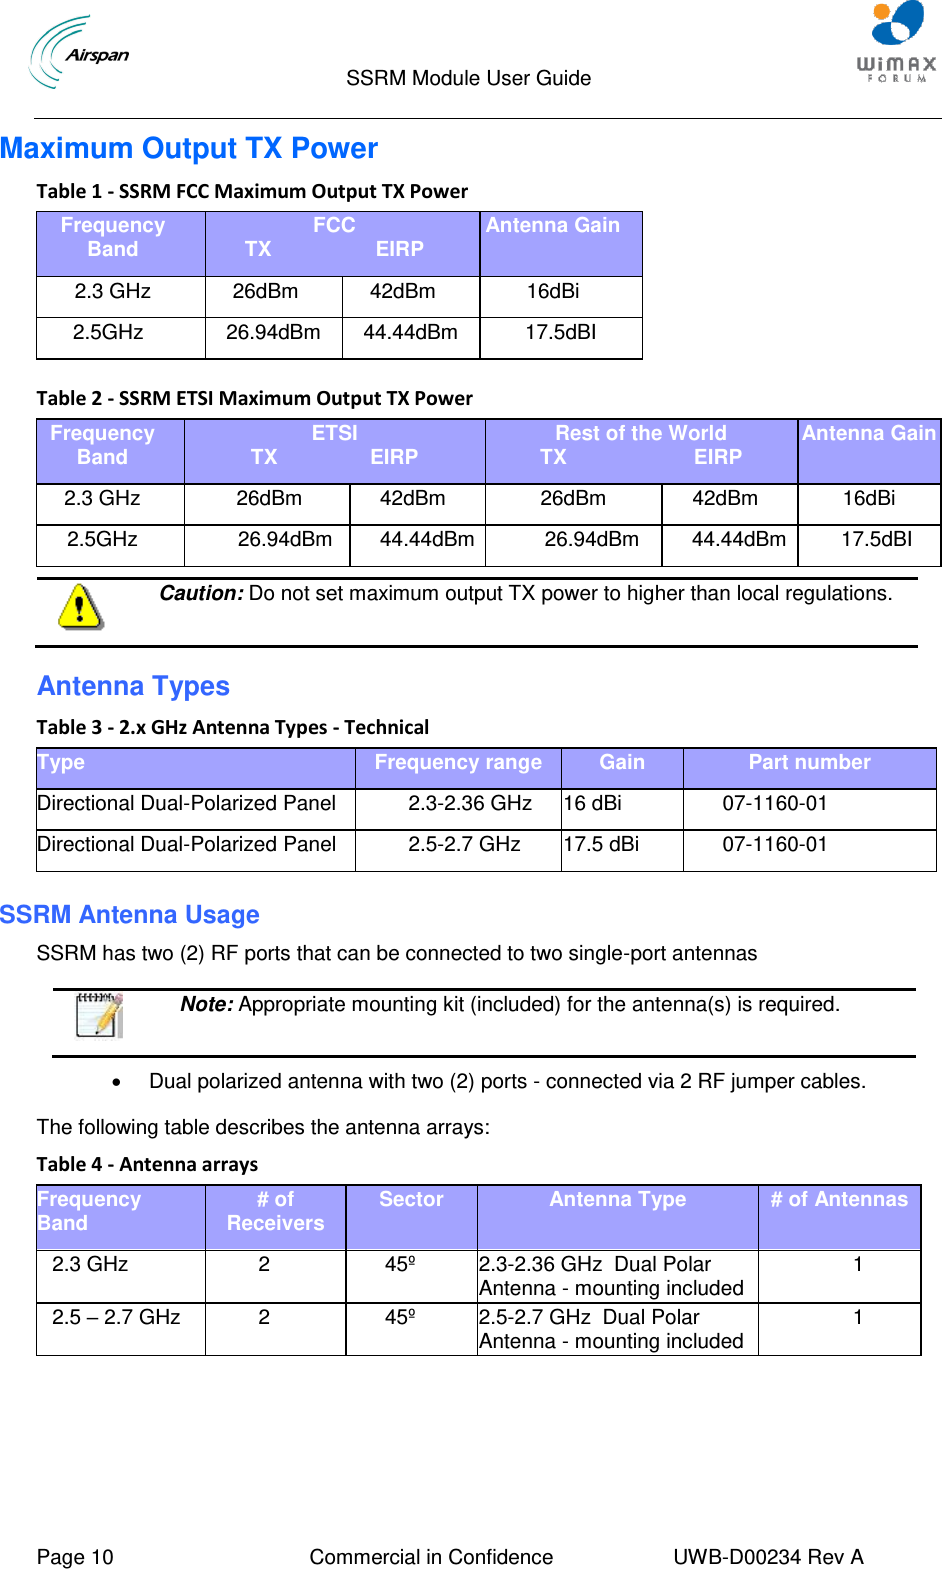                                  SSRM Module User Guide     Page 10  Commercial in Confidence  UWB-D00234 Rev A    Maximum Output TX Power Table 1 - SSRM FCC Maximum Output TX Power Frequency Band FCC TX                  EIRP Antenna Gain 2.3 GHz 26dBm 42dBm 16dBi 2.5GHz 26.94dBm 44.44dBm 17.5dBI   Table 2 - SSRM ETSI Maximum Output TX Power Frequency Band ETSI TX                EIRP Rest of the World TX                      EIRP Antenna Gain 2.3 GHz 26dBm      42dBm 26dBm 42dBm 16dBi 2.5GHz 26.94dBm      44.44dBm 26.94dBm 44.44dBm 17.5dBI   Caution: Do not set maximum output TX power to higher than local regulations.  Antenna Types Table 3 - 2.x GHz Antenna Types - Technical Type Frequency range Gain Part number Directional Dual-Polarized Panel  2.3-2.36 GHz 16 dBi 07-1160-01 Directional Dual-Polarized Panel  2.5-2.7 GHz 17.5 dBi 07-1160-01  SSRM Antenna Usage SSRM has two (2) RF ports that can be connected to two single-port antennas    Note: Appropriate mounting kit (included) for the antenna(s) is required.    Dual polarized antenna with two (2) ports - connected via 2 RF jumper cables.  The following table describes the antenna arrays: Table 4 - Antenna arrays Frequency Band # of Receivers Sector Antenna Type # of Antennas  2.3 GHz 2 45º 2.3-2.36 GHz  Dual Polar Antenna - mounting included 1 2.5  2.7 GHz 2 45º 2.5-2.7 GHz  Dual Polar Antenna - mounting included 1    